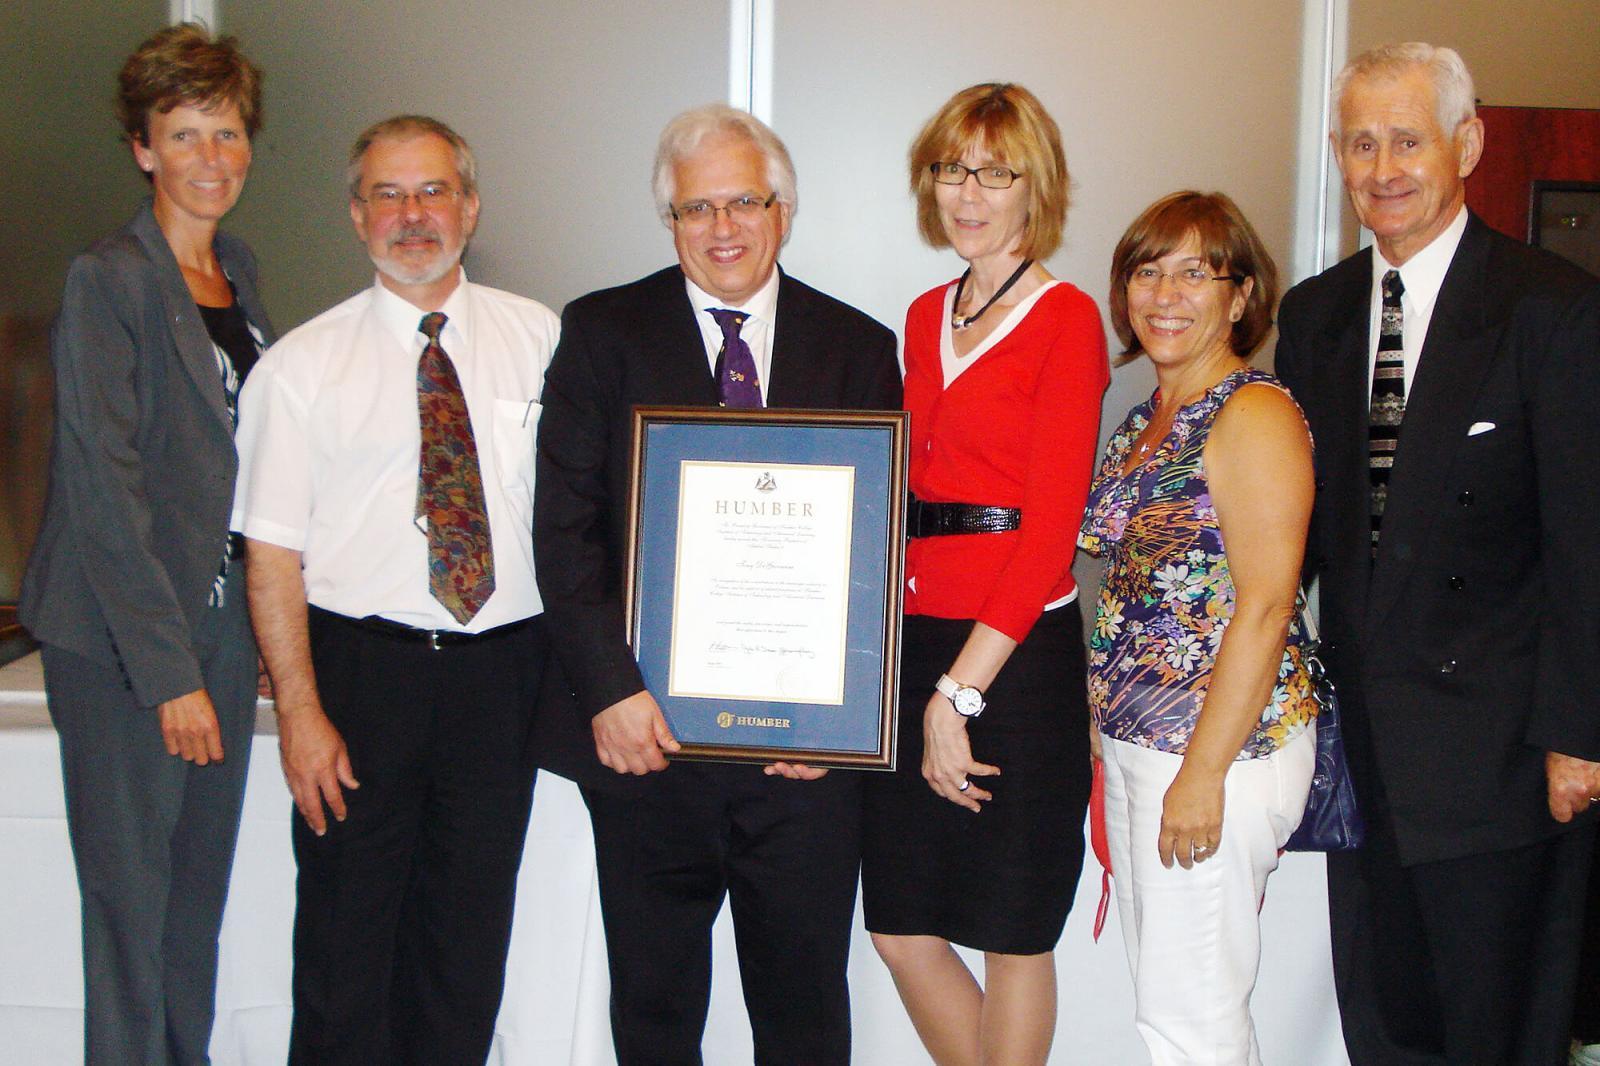 From left, Sally Harvey, LO education and labour manager; Joe Tomona, associate dean, Humber College School of Applied Technology; honouree Tony DiGiovanni; Denise Devlin-Li, dean, School of Applied Technology; Anna Marie DiCarlo, sister of Tony DiGiovanni and Terry Murphy, retired Landscape Ontario human resources manager and Humber instructor.